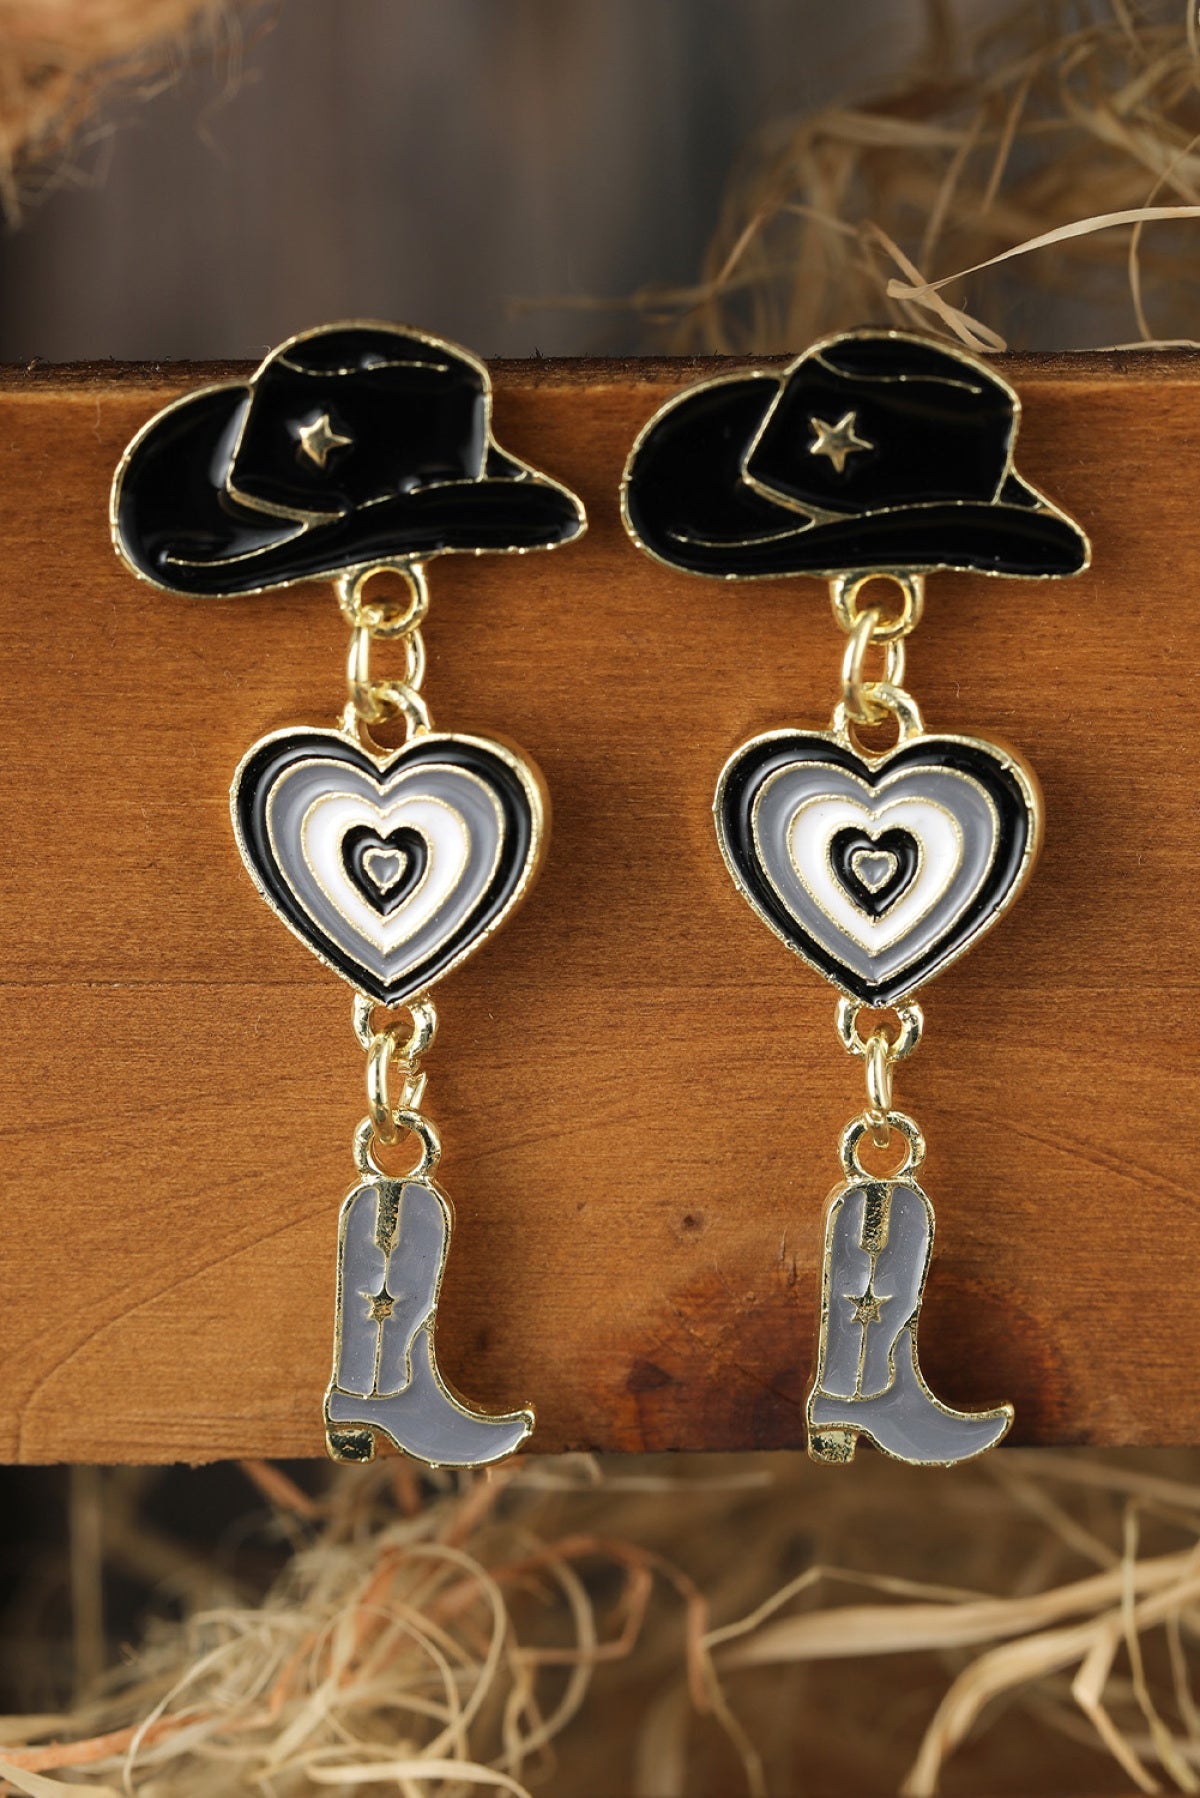 Black Cowboy Hat And Boots Earrings